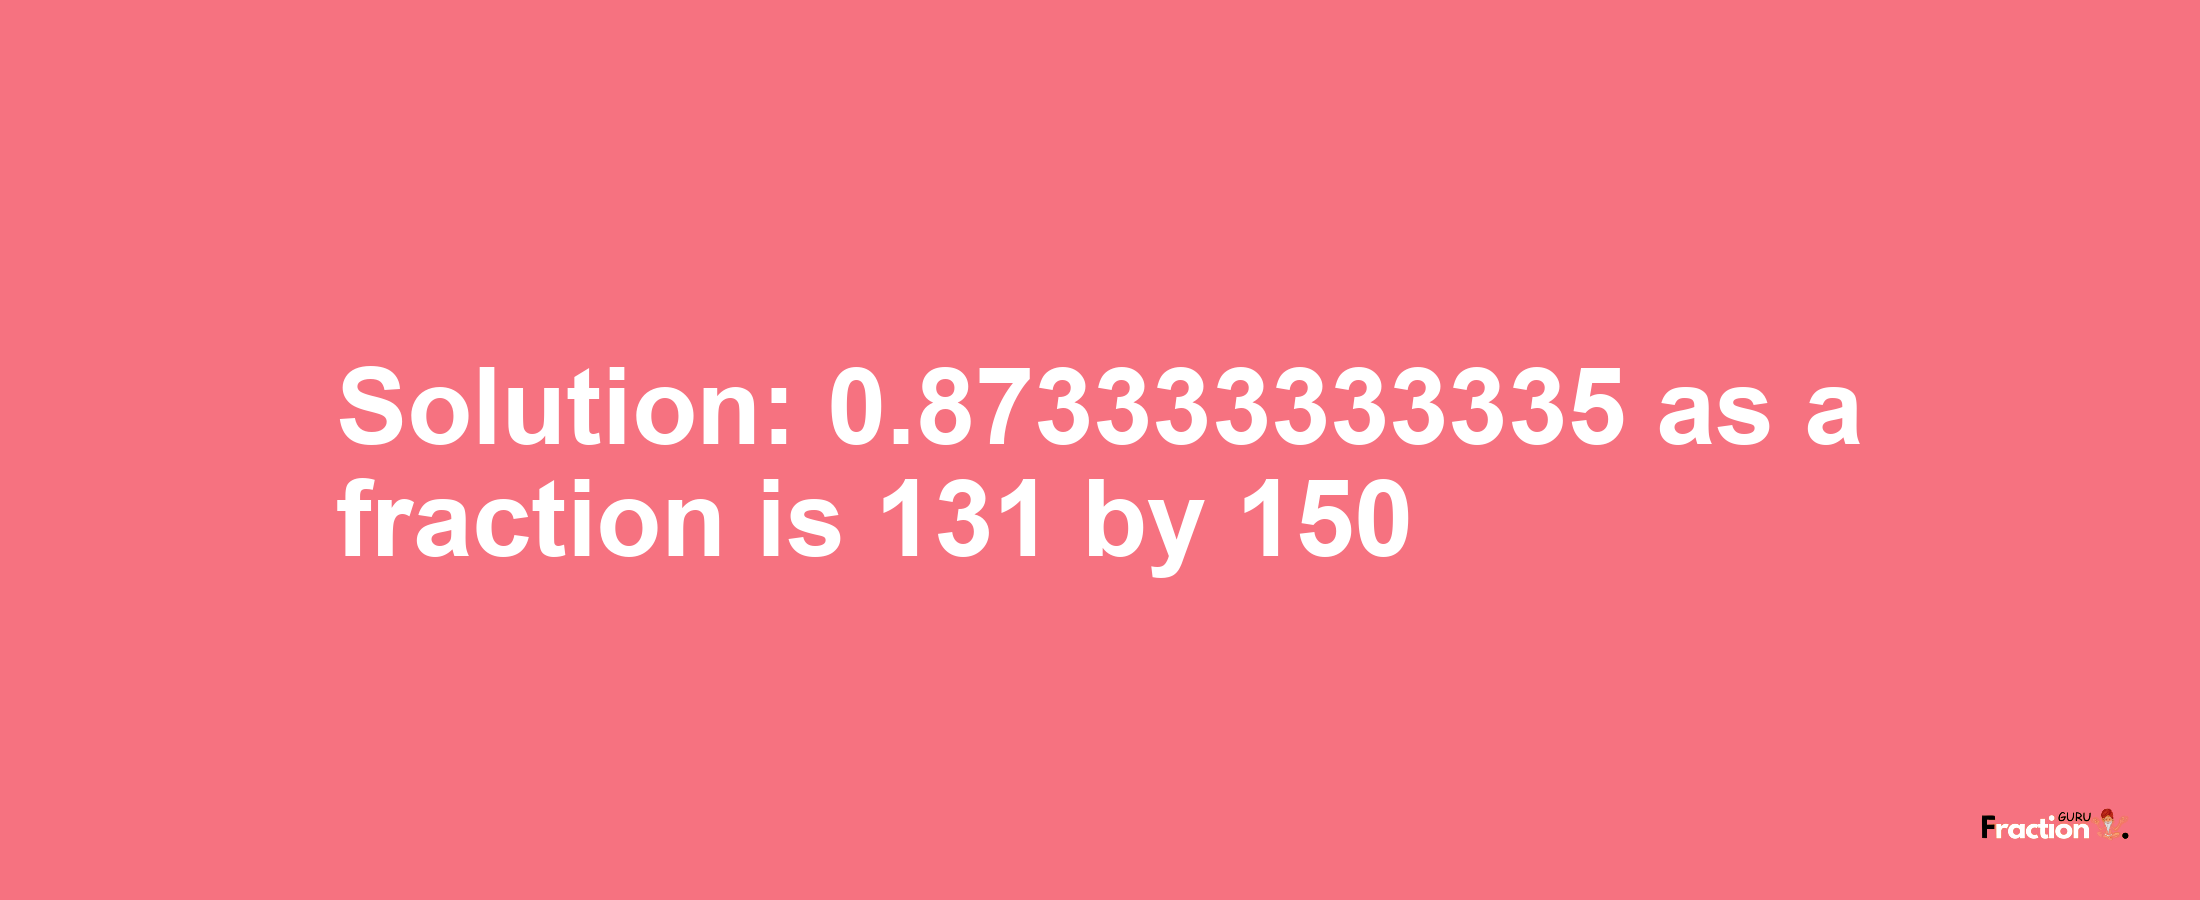 Solution:0.873333333335 as a fraction is 131/150